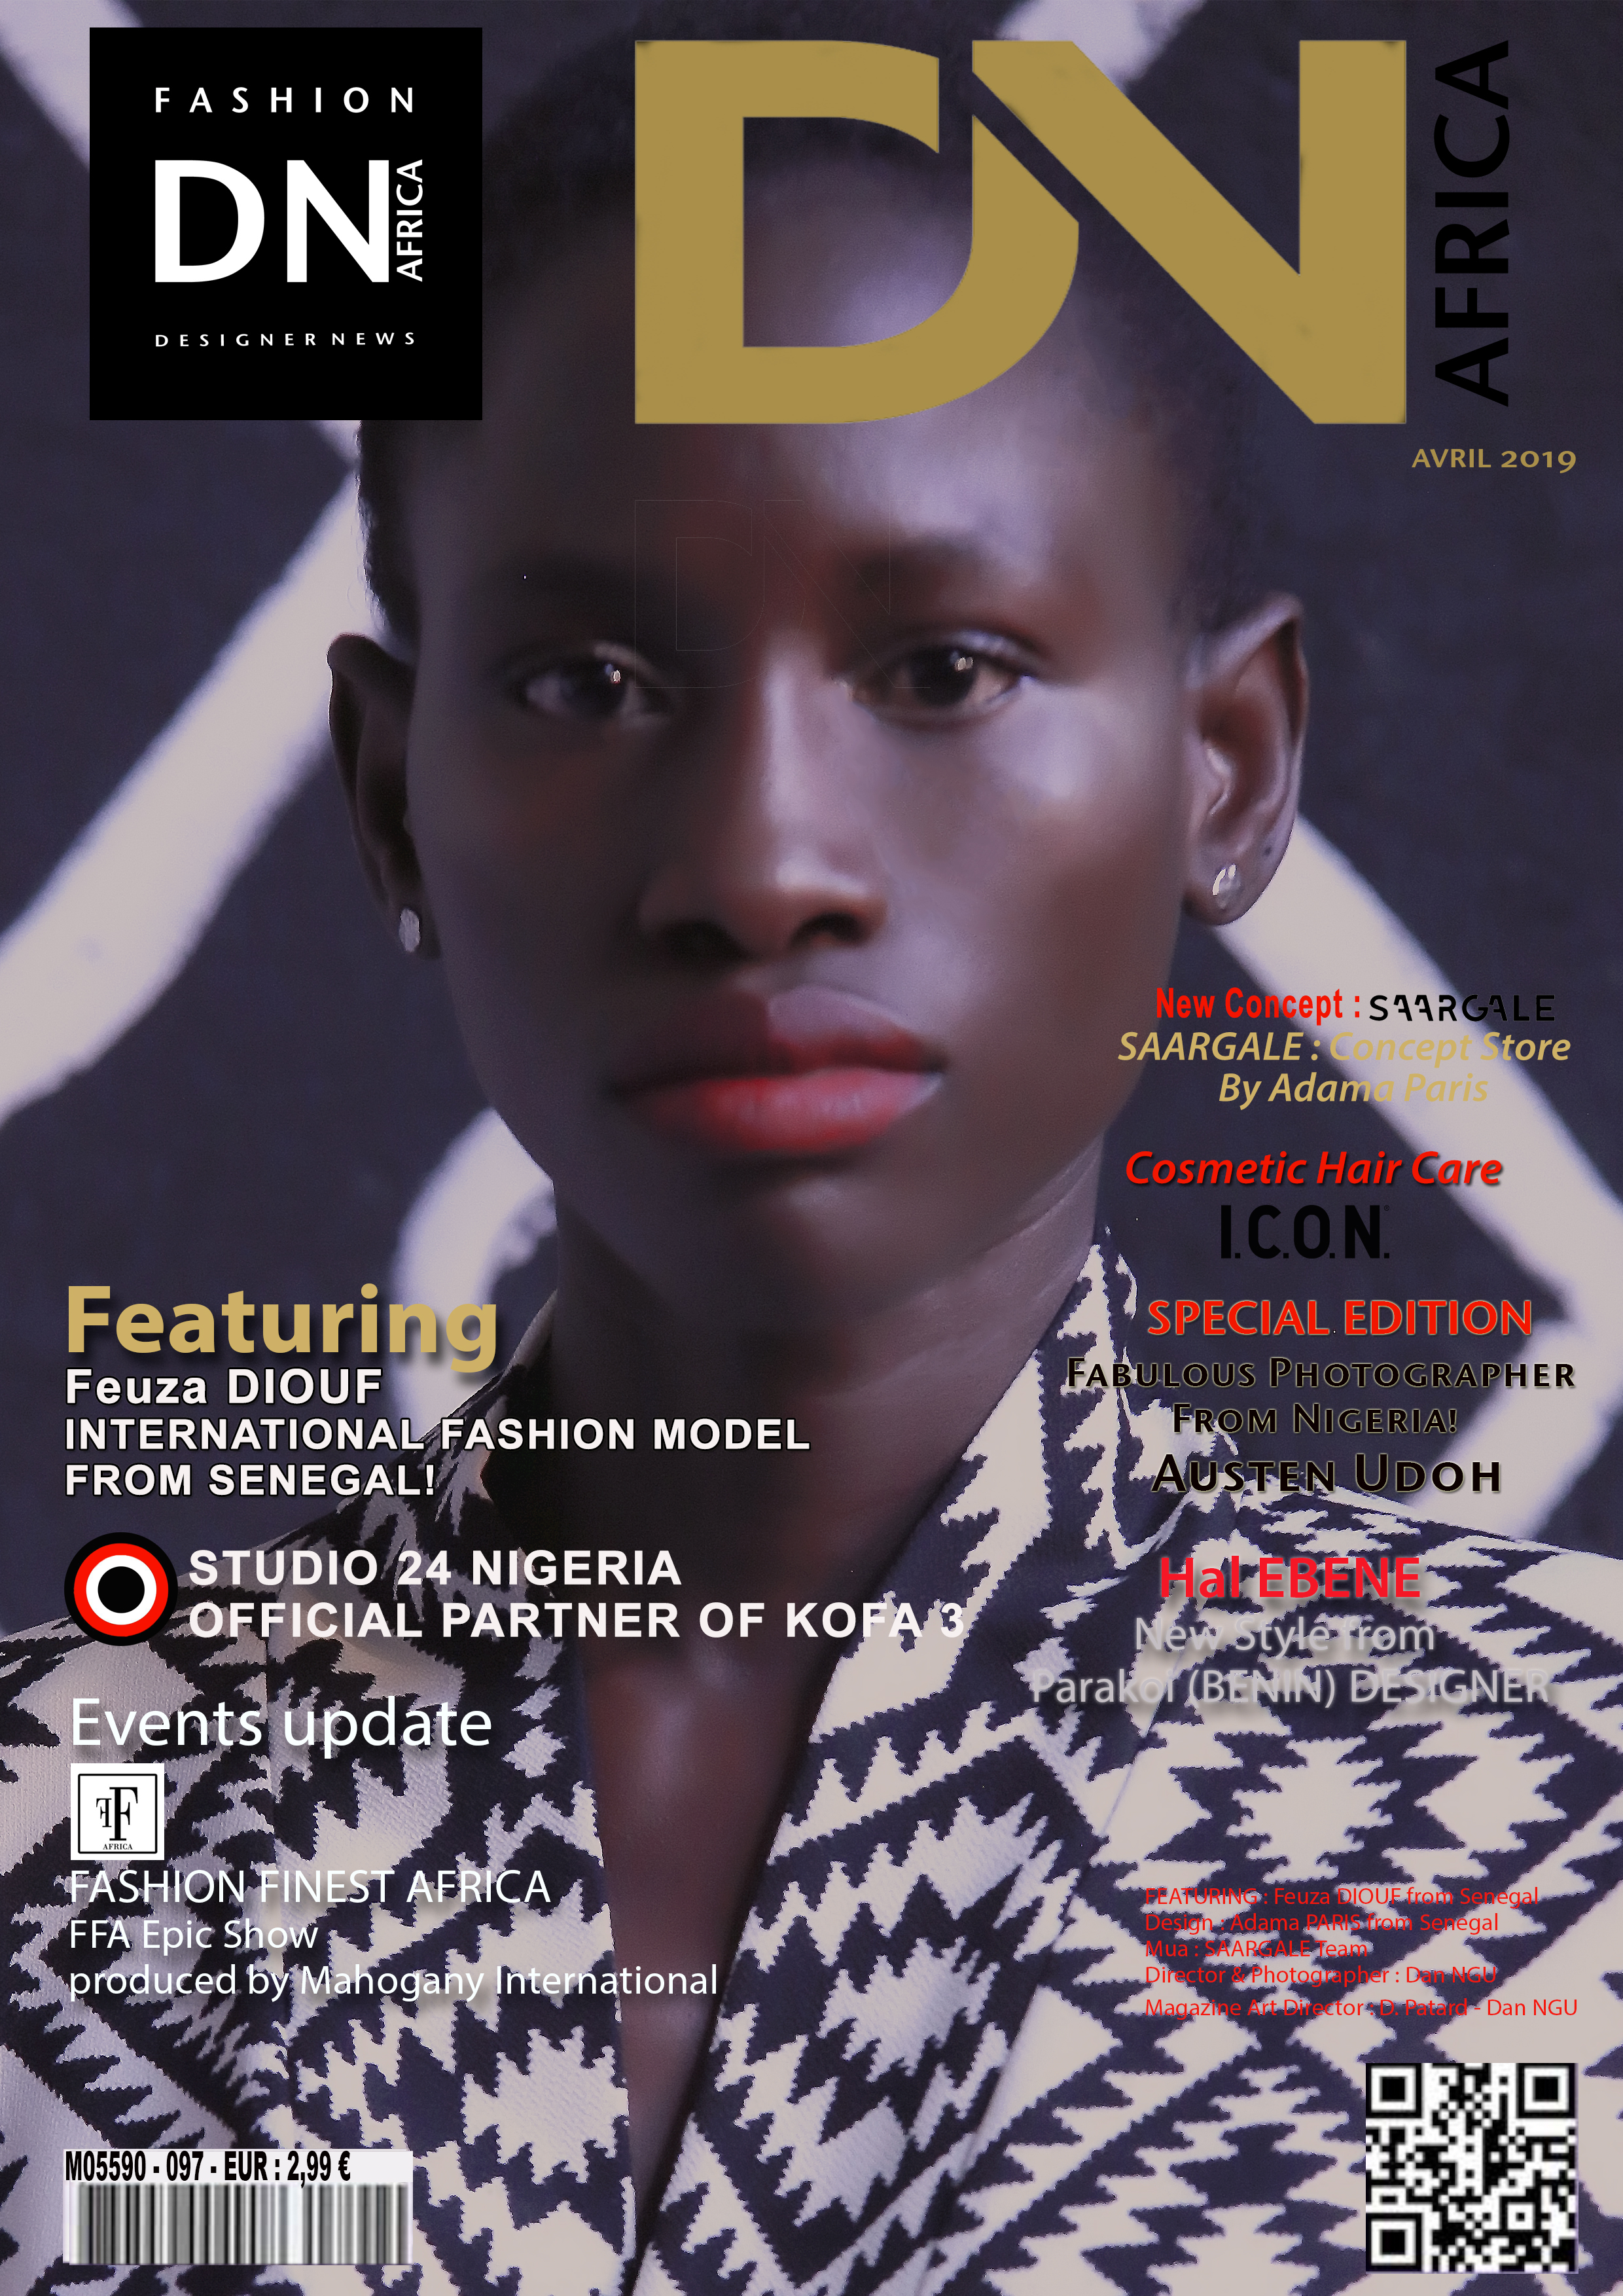 AFRICAN FASHION STYLE MAGAZINE - may 2019 COVER - number 97 -Feuza DIOUF International Model from Senegal - Official Media Partner DN AFRICA - STUDIO 24 NIGERIA - STUDIO 24 INTERNATIONAL - Ifeanyi Christopher Oputa MD AND CEO OF COLVI LIMITED AND STUDIO 24 - CHEVEUX CHERIE and CHEVEUX CHERIE STUDIO BY MARIEME DUBOZ- Fashion Editor Nahomie NOOR COULIBALY